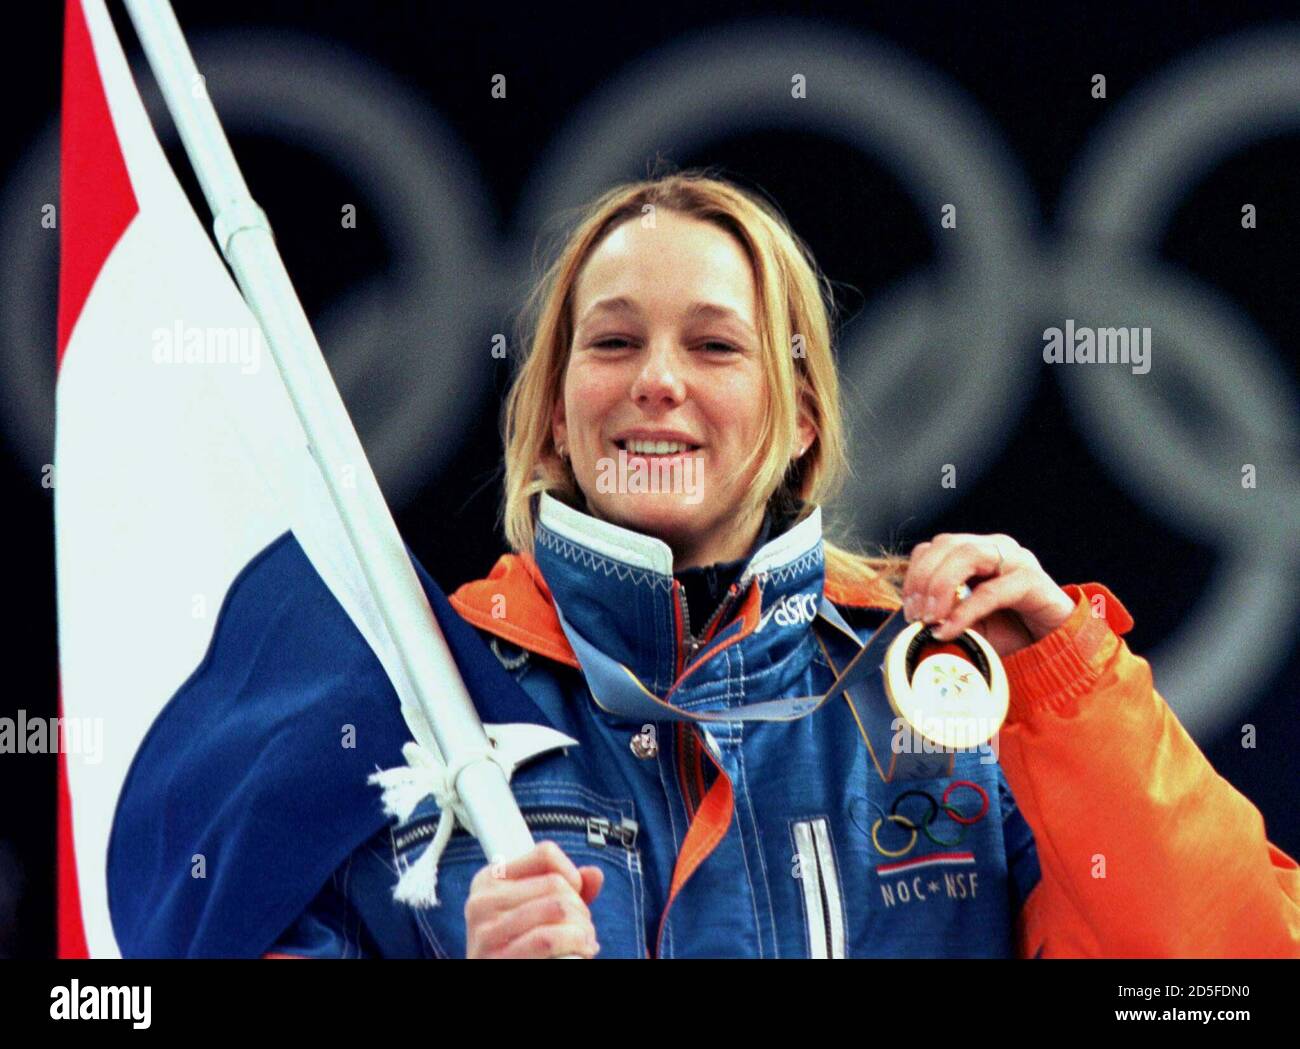 Overgang pint velstand Marianne Timmer of the Netherlands shows her gold medal during the awarding  ceremony of the women's 1500 metres speed skating race in Nagano, February  16. Timmer clocked the best time of one